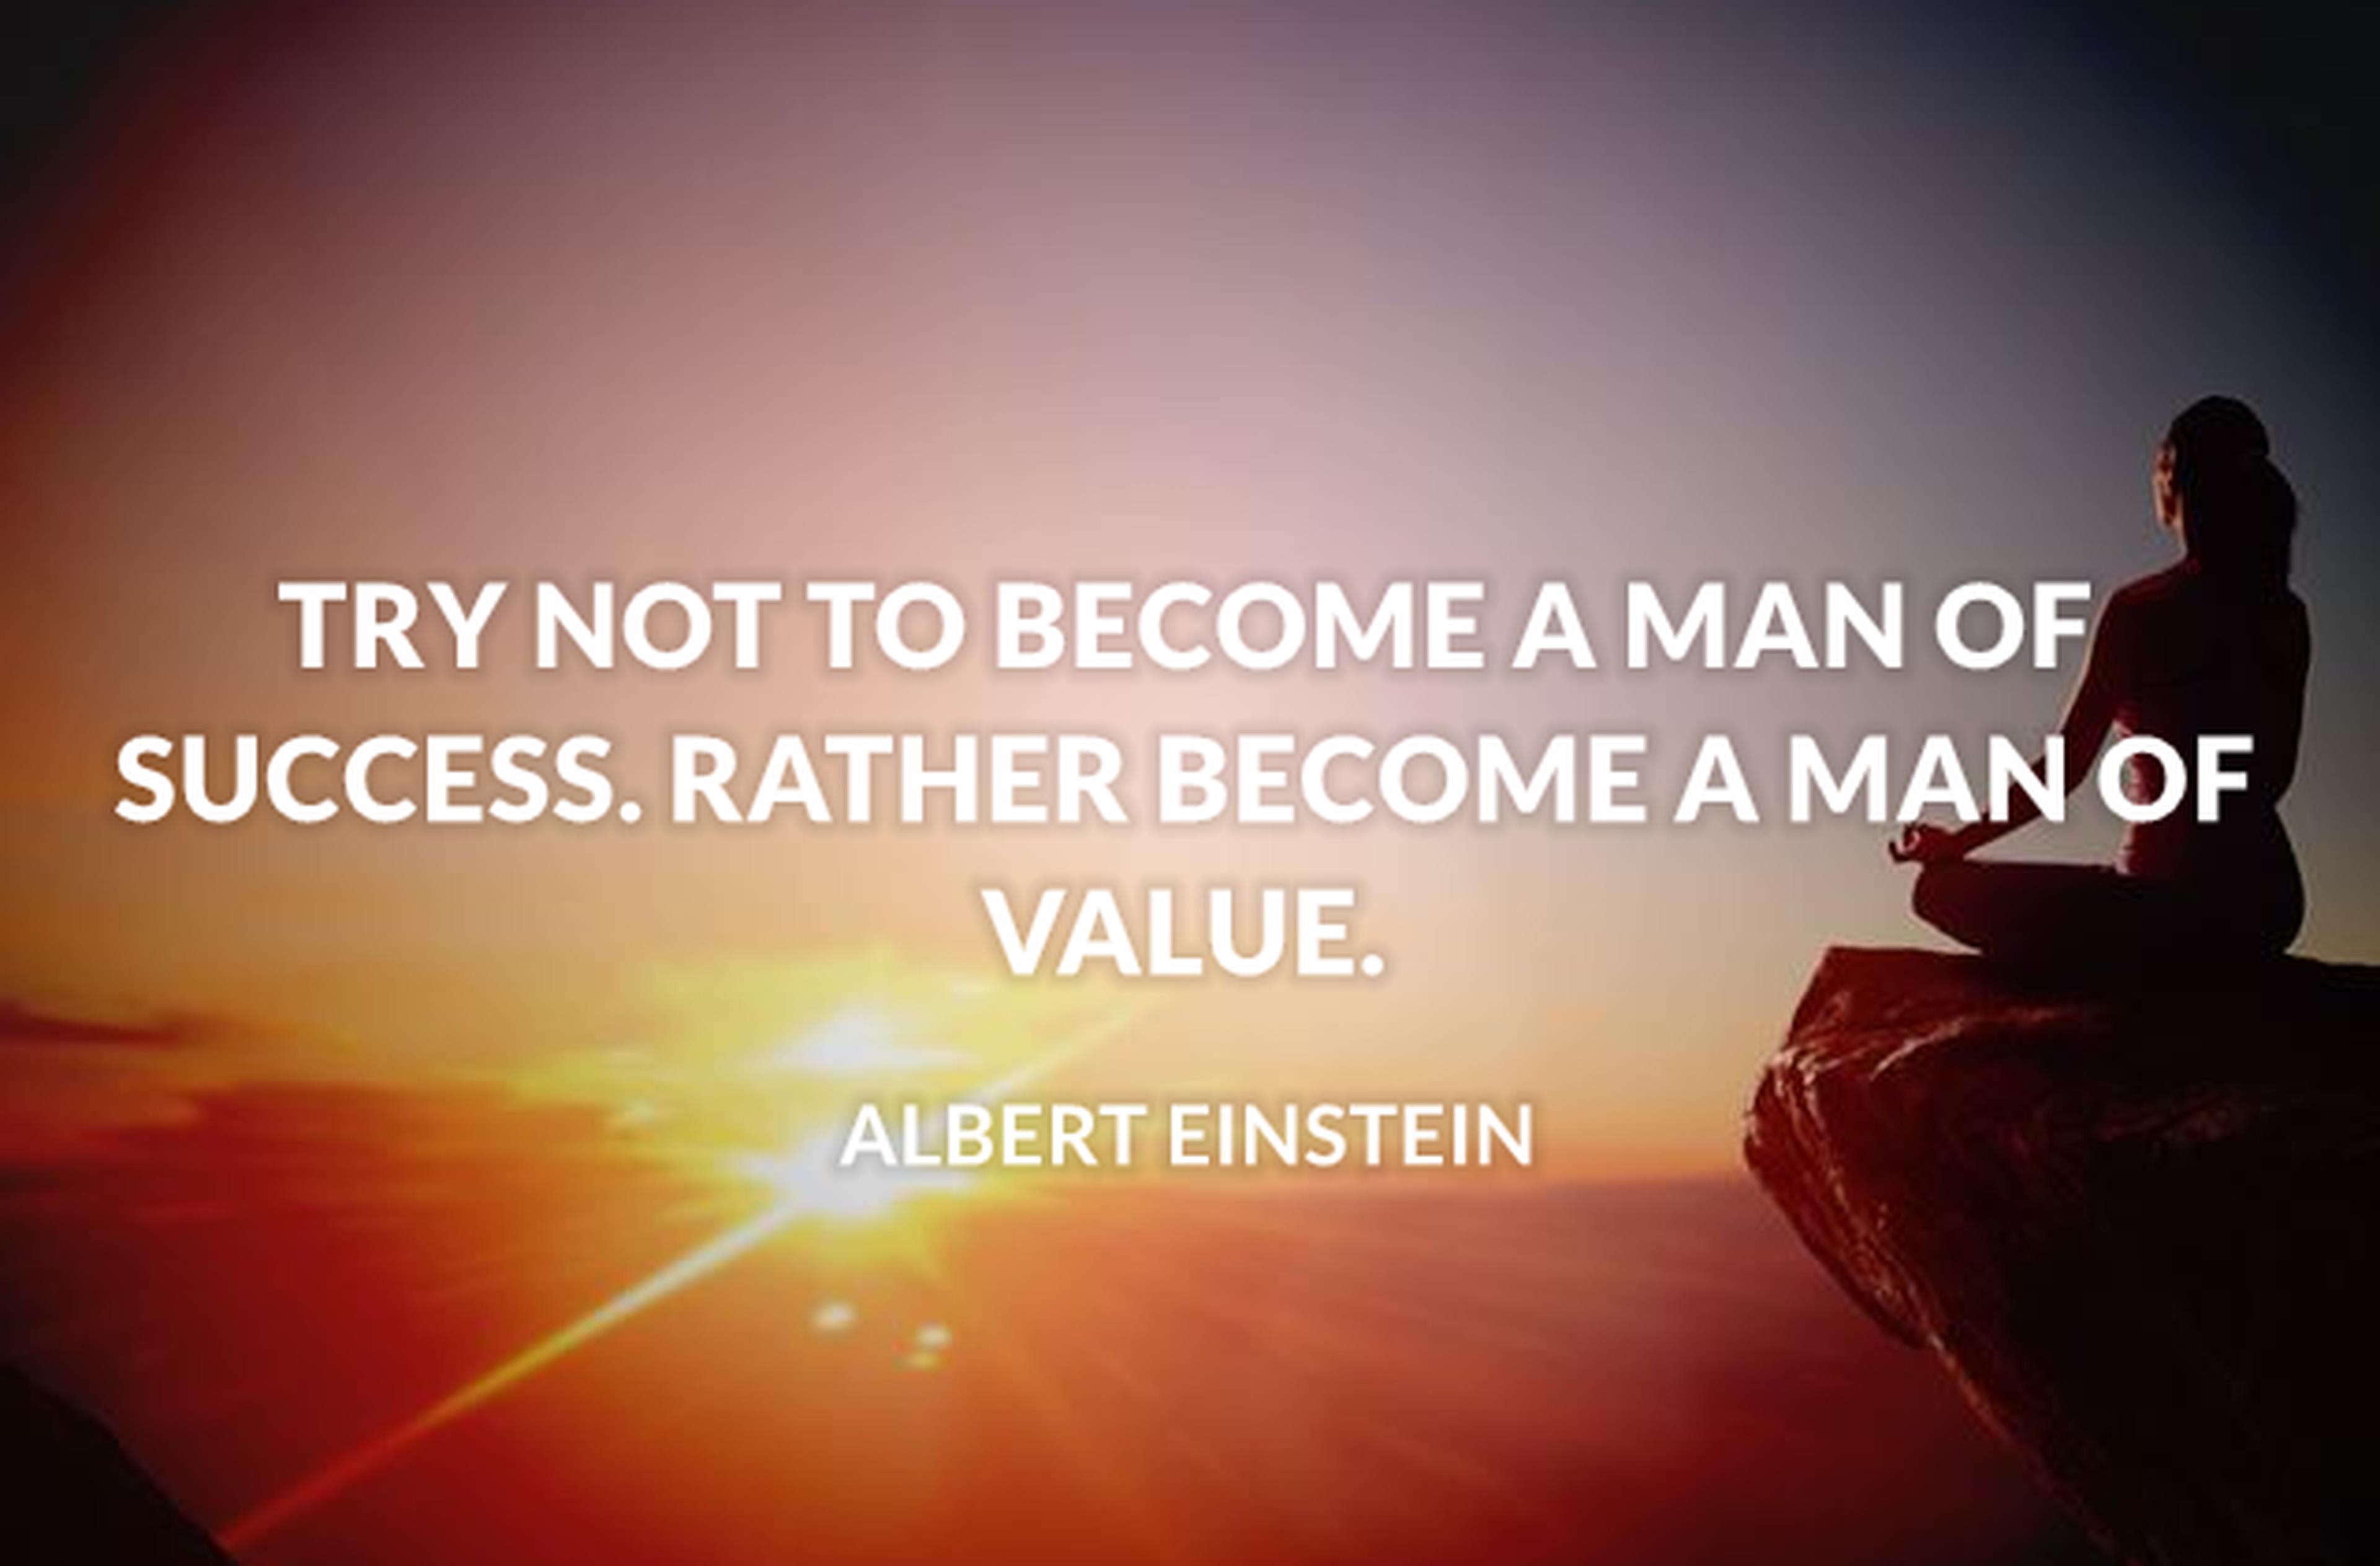 Try not to become a man of success. Rather become a man of value.